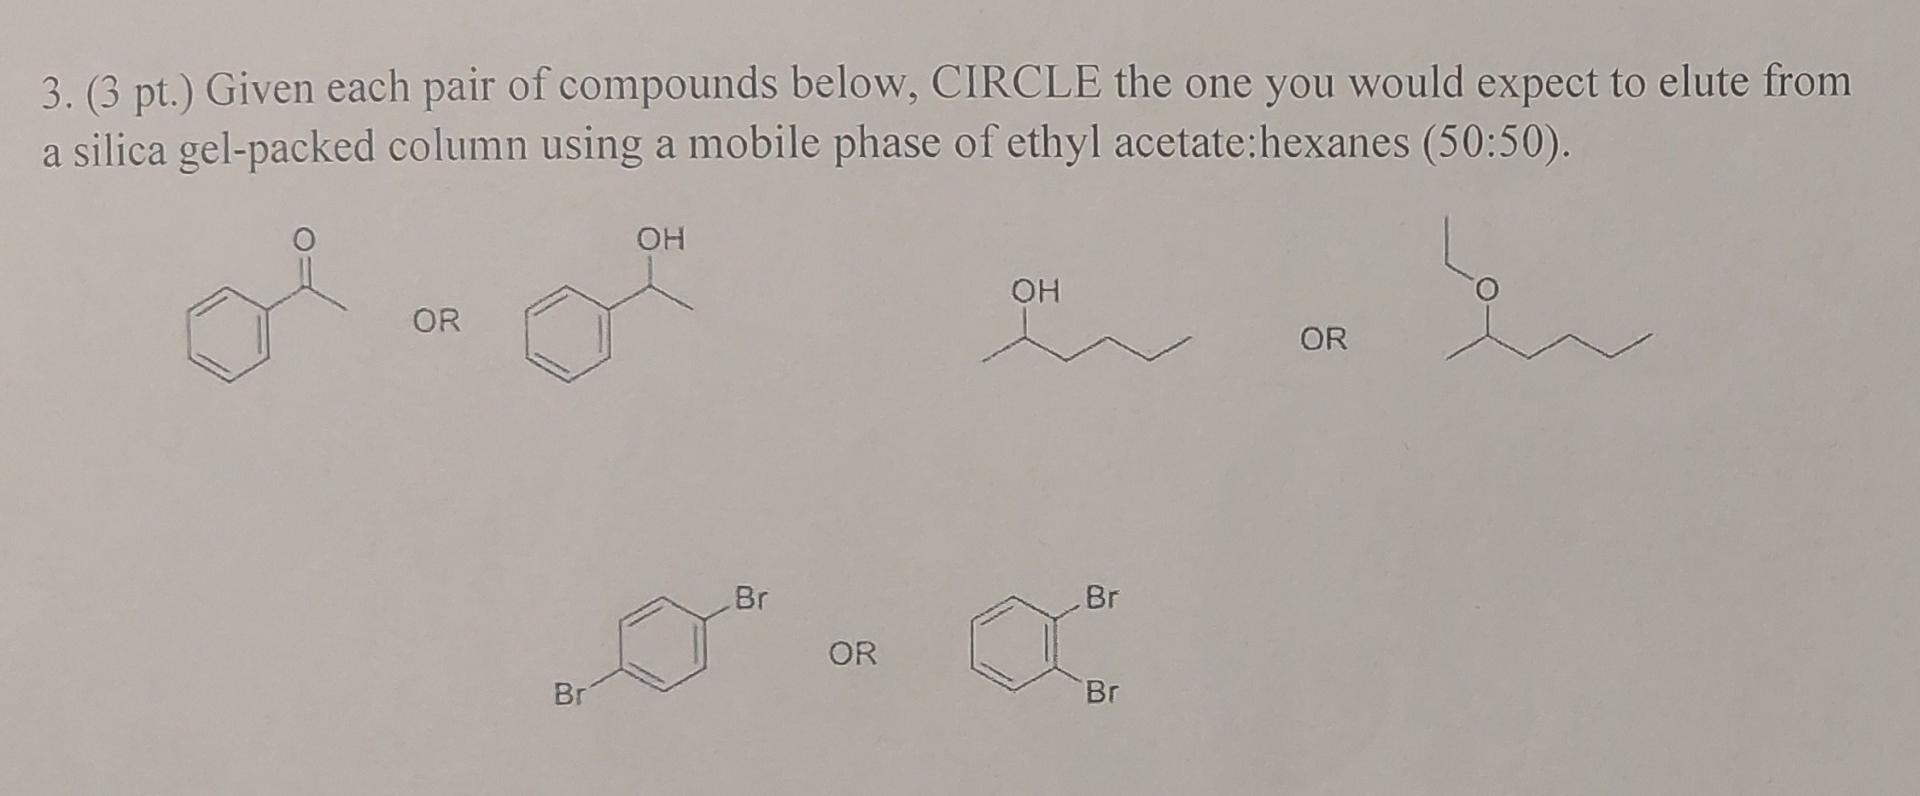 3. (3 pt.) Given each pair of compounds below, CIRCLE the one you would expect to elute from a silica gel-packed column using